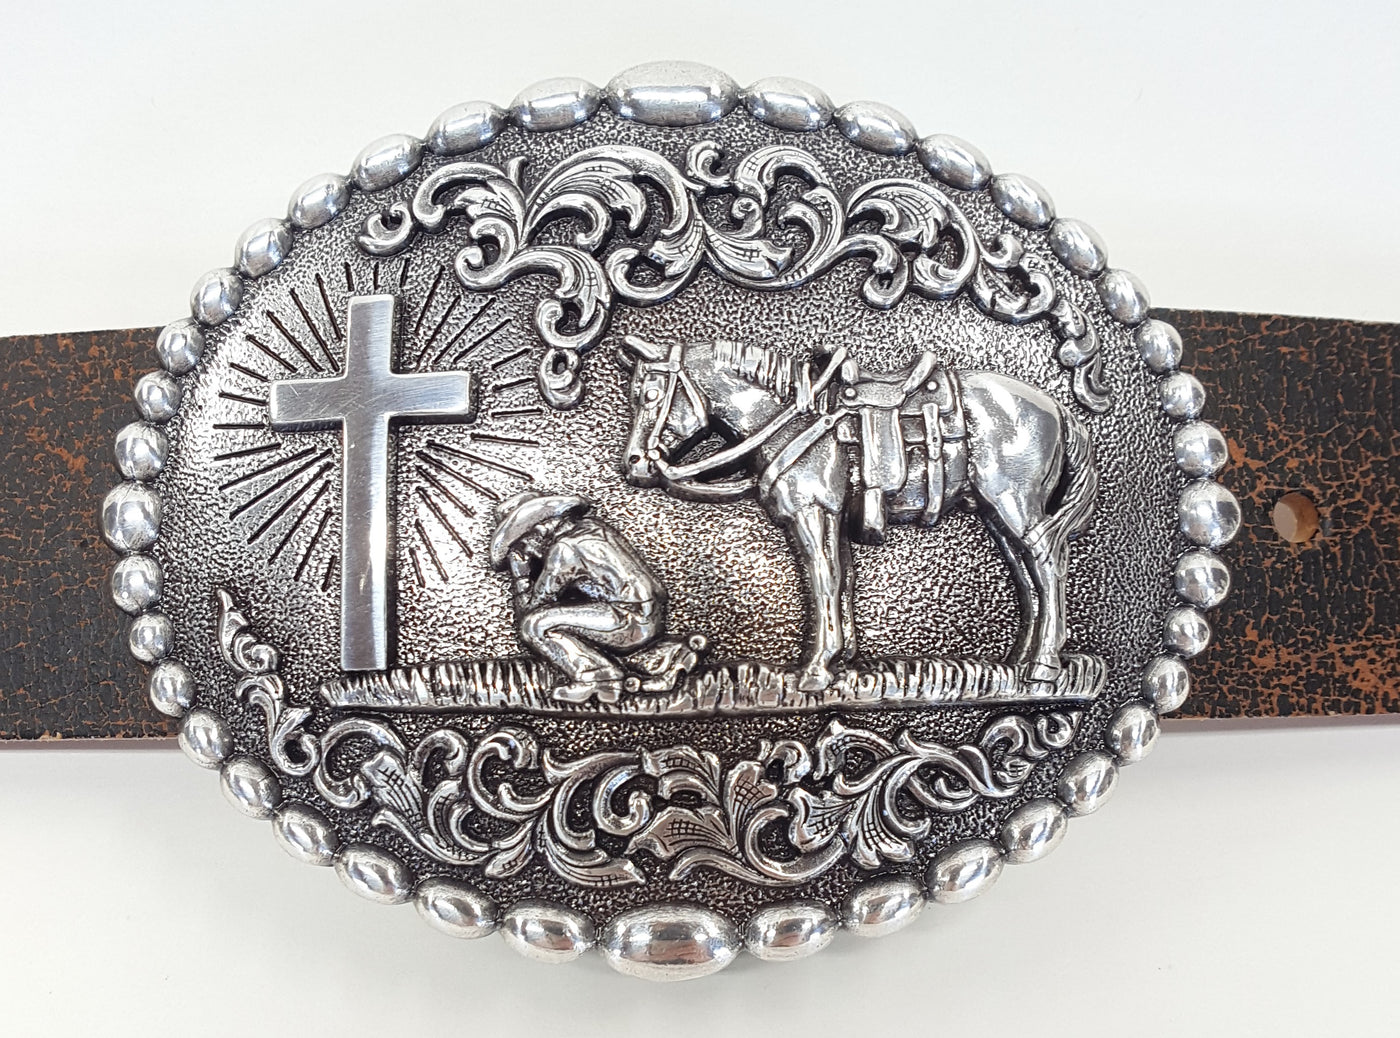 Nocona buckle with beaded edge. Cowboy kneeling at Cross with his trusted horse behind him. A raised floral design perfectly complements this reverent design. Measures 3-1/8" tall by 4" wide  Available online and in our shop in Smyrna, TN, just outside of Nashville